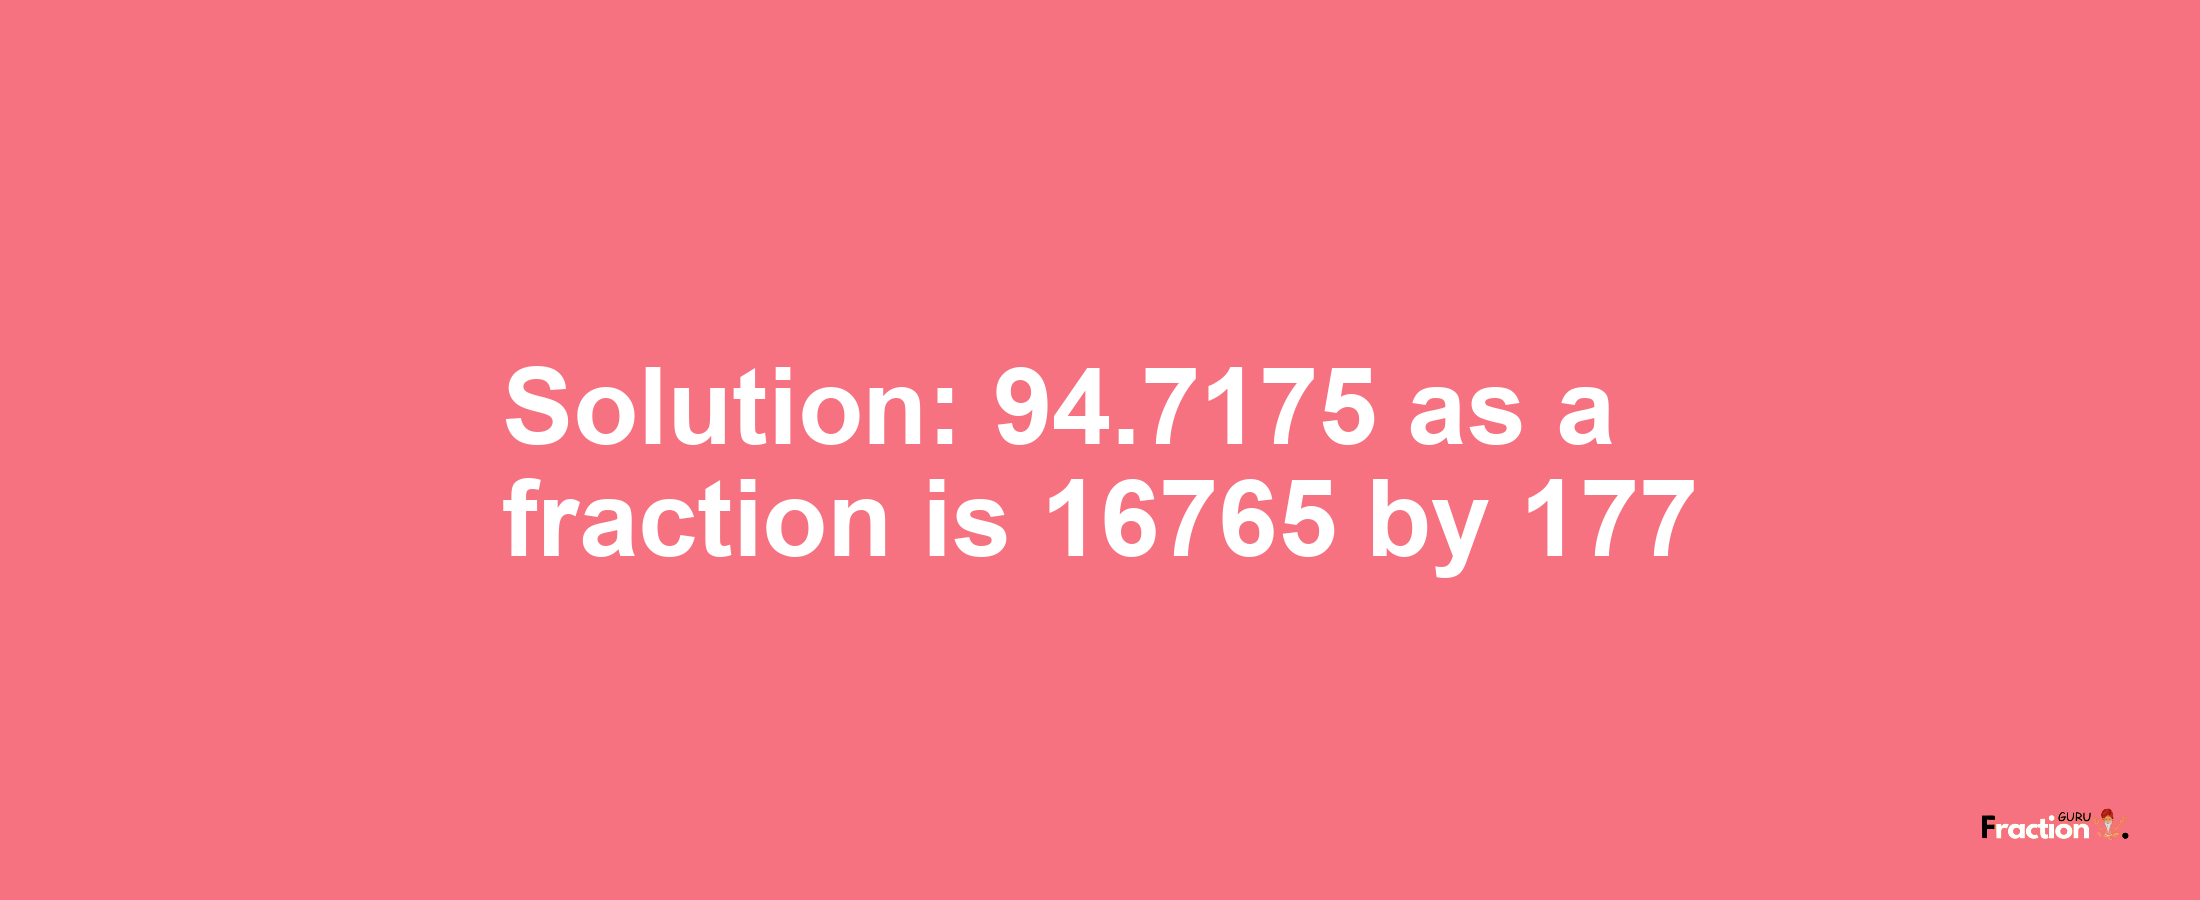 Solution:94.7175 as a fraction is 16765/177